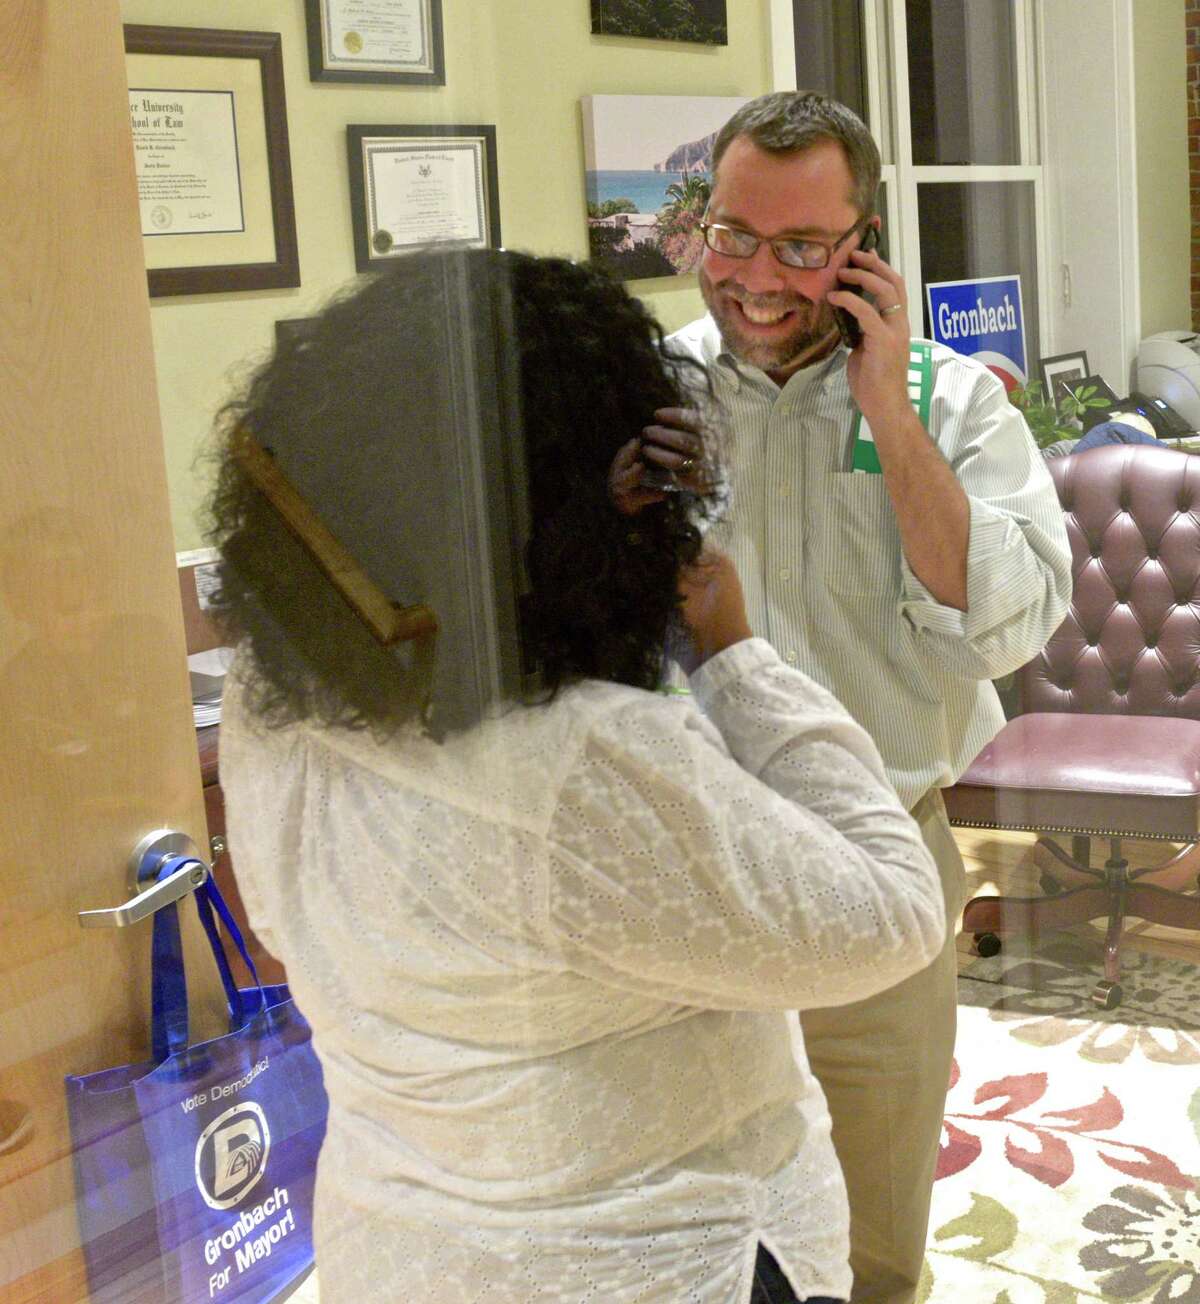 David Gronbach, Democratic candidate for Mayor in New Milford, gets results on the phone as he spends a moment with is wife Vanessa .